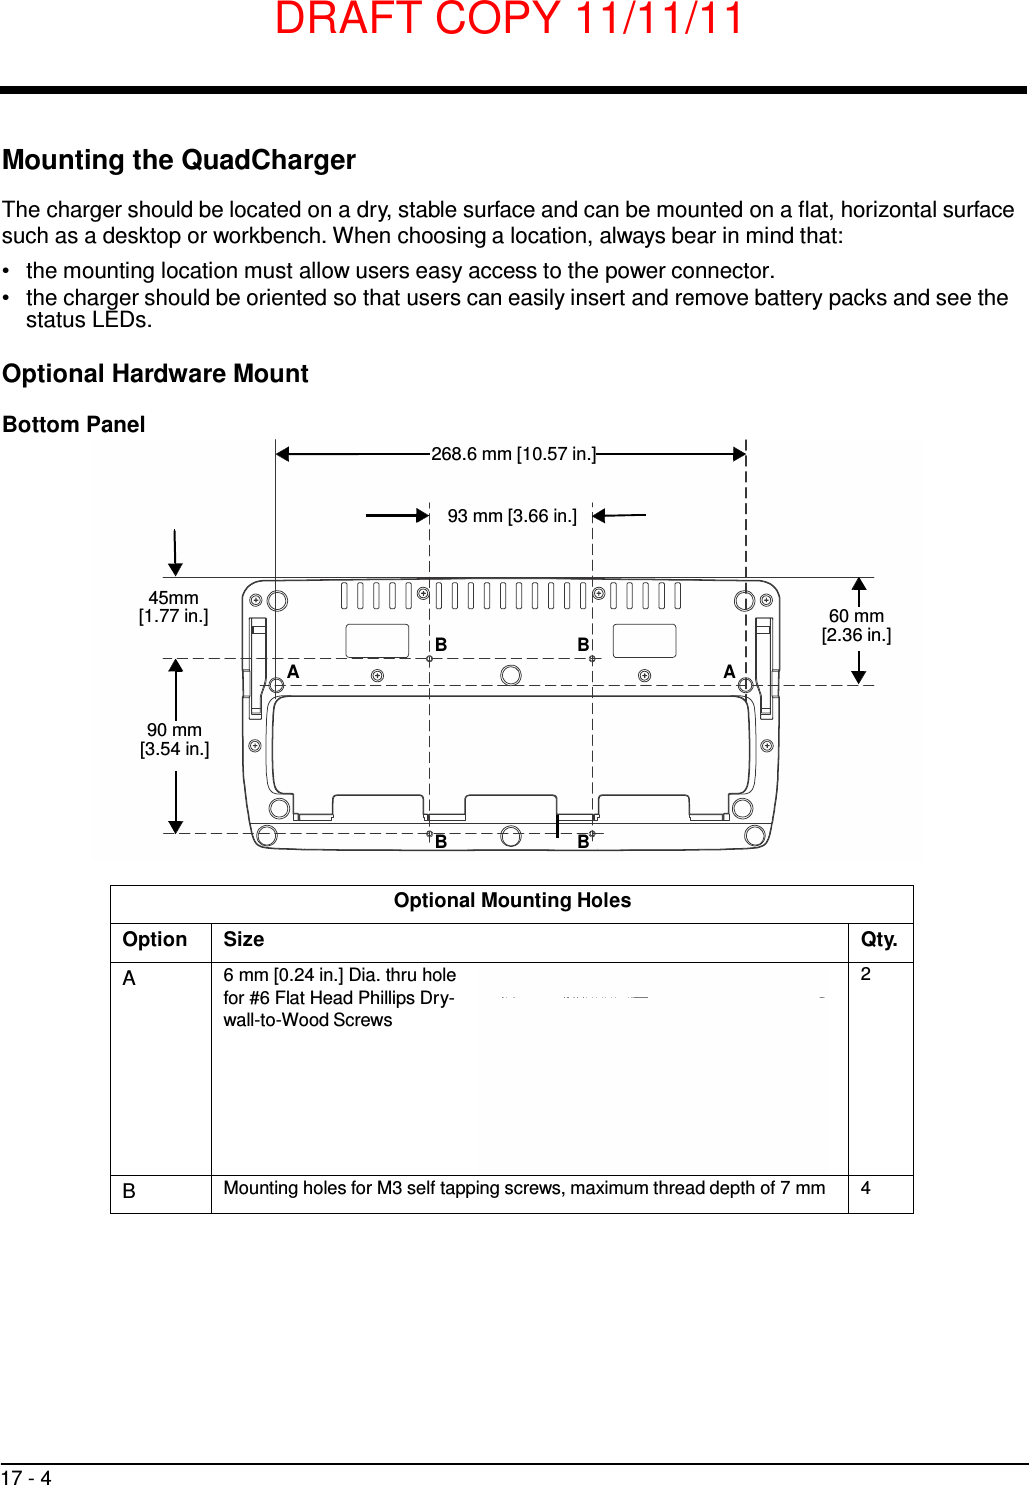 DRAFT COPY 11/11/11 17 - 4      Mounting the QuadCharger  The charger should be located on a dry, stable surface and can be mounted on a flat, horizontal surface such as a desktop or workbench. When choosing a location, always bear in mind that: •   the mounting location must allow users easy access to the power connector. •   the charger should be oriented so that users can easily insert and remove battery packs and see the status LEDs.  Optional Hardware Mount  Bottom Panel  268.6 mm [10.57 in.]   93 mm [3.66 in.]    45mm [1.77 in.] B B A A  60 mm [2.36 in.]   90 mm [3.54 in.]     B B   Optional Mounting Holes Option Size Qty.  A 6 mm [0.24 in.] Dia. thru hole for #6 Flat Head Phillips Dry- wall-to-Wood Screws    2 B Mounting holes for M3 self tapping screws, maximum thread depth of 7 mm 4 